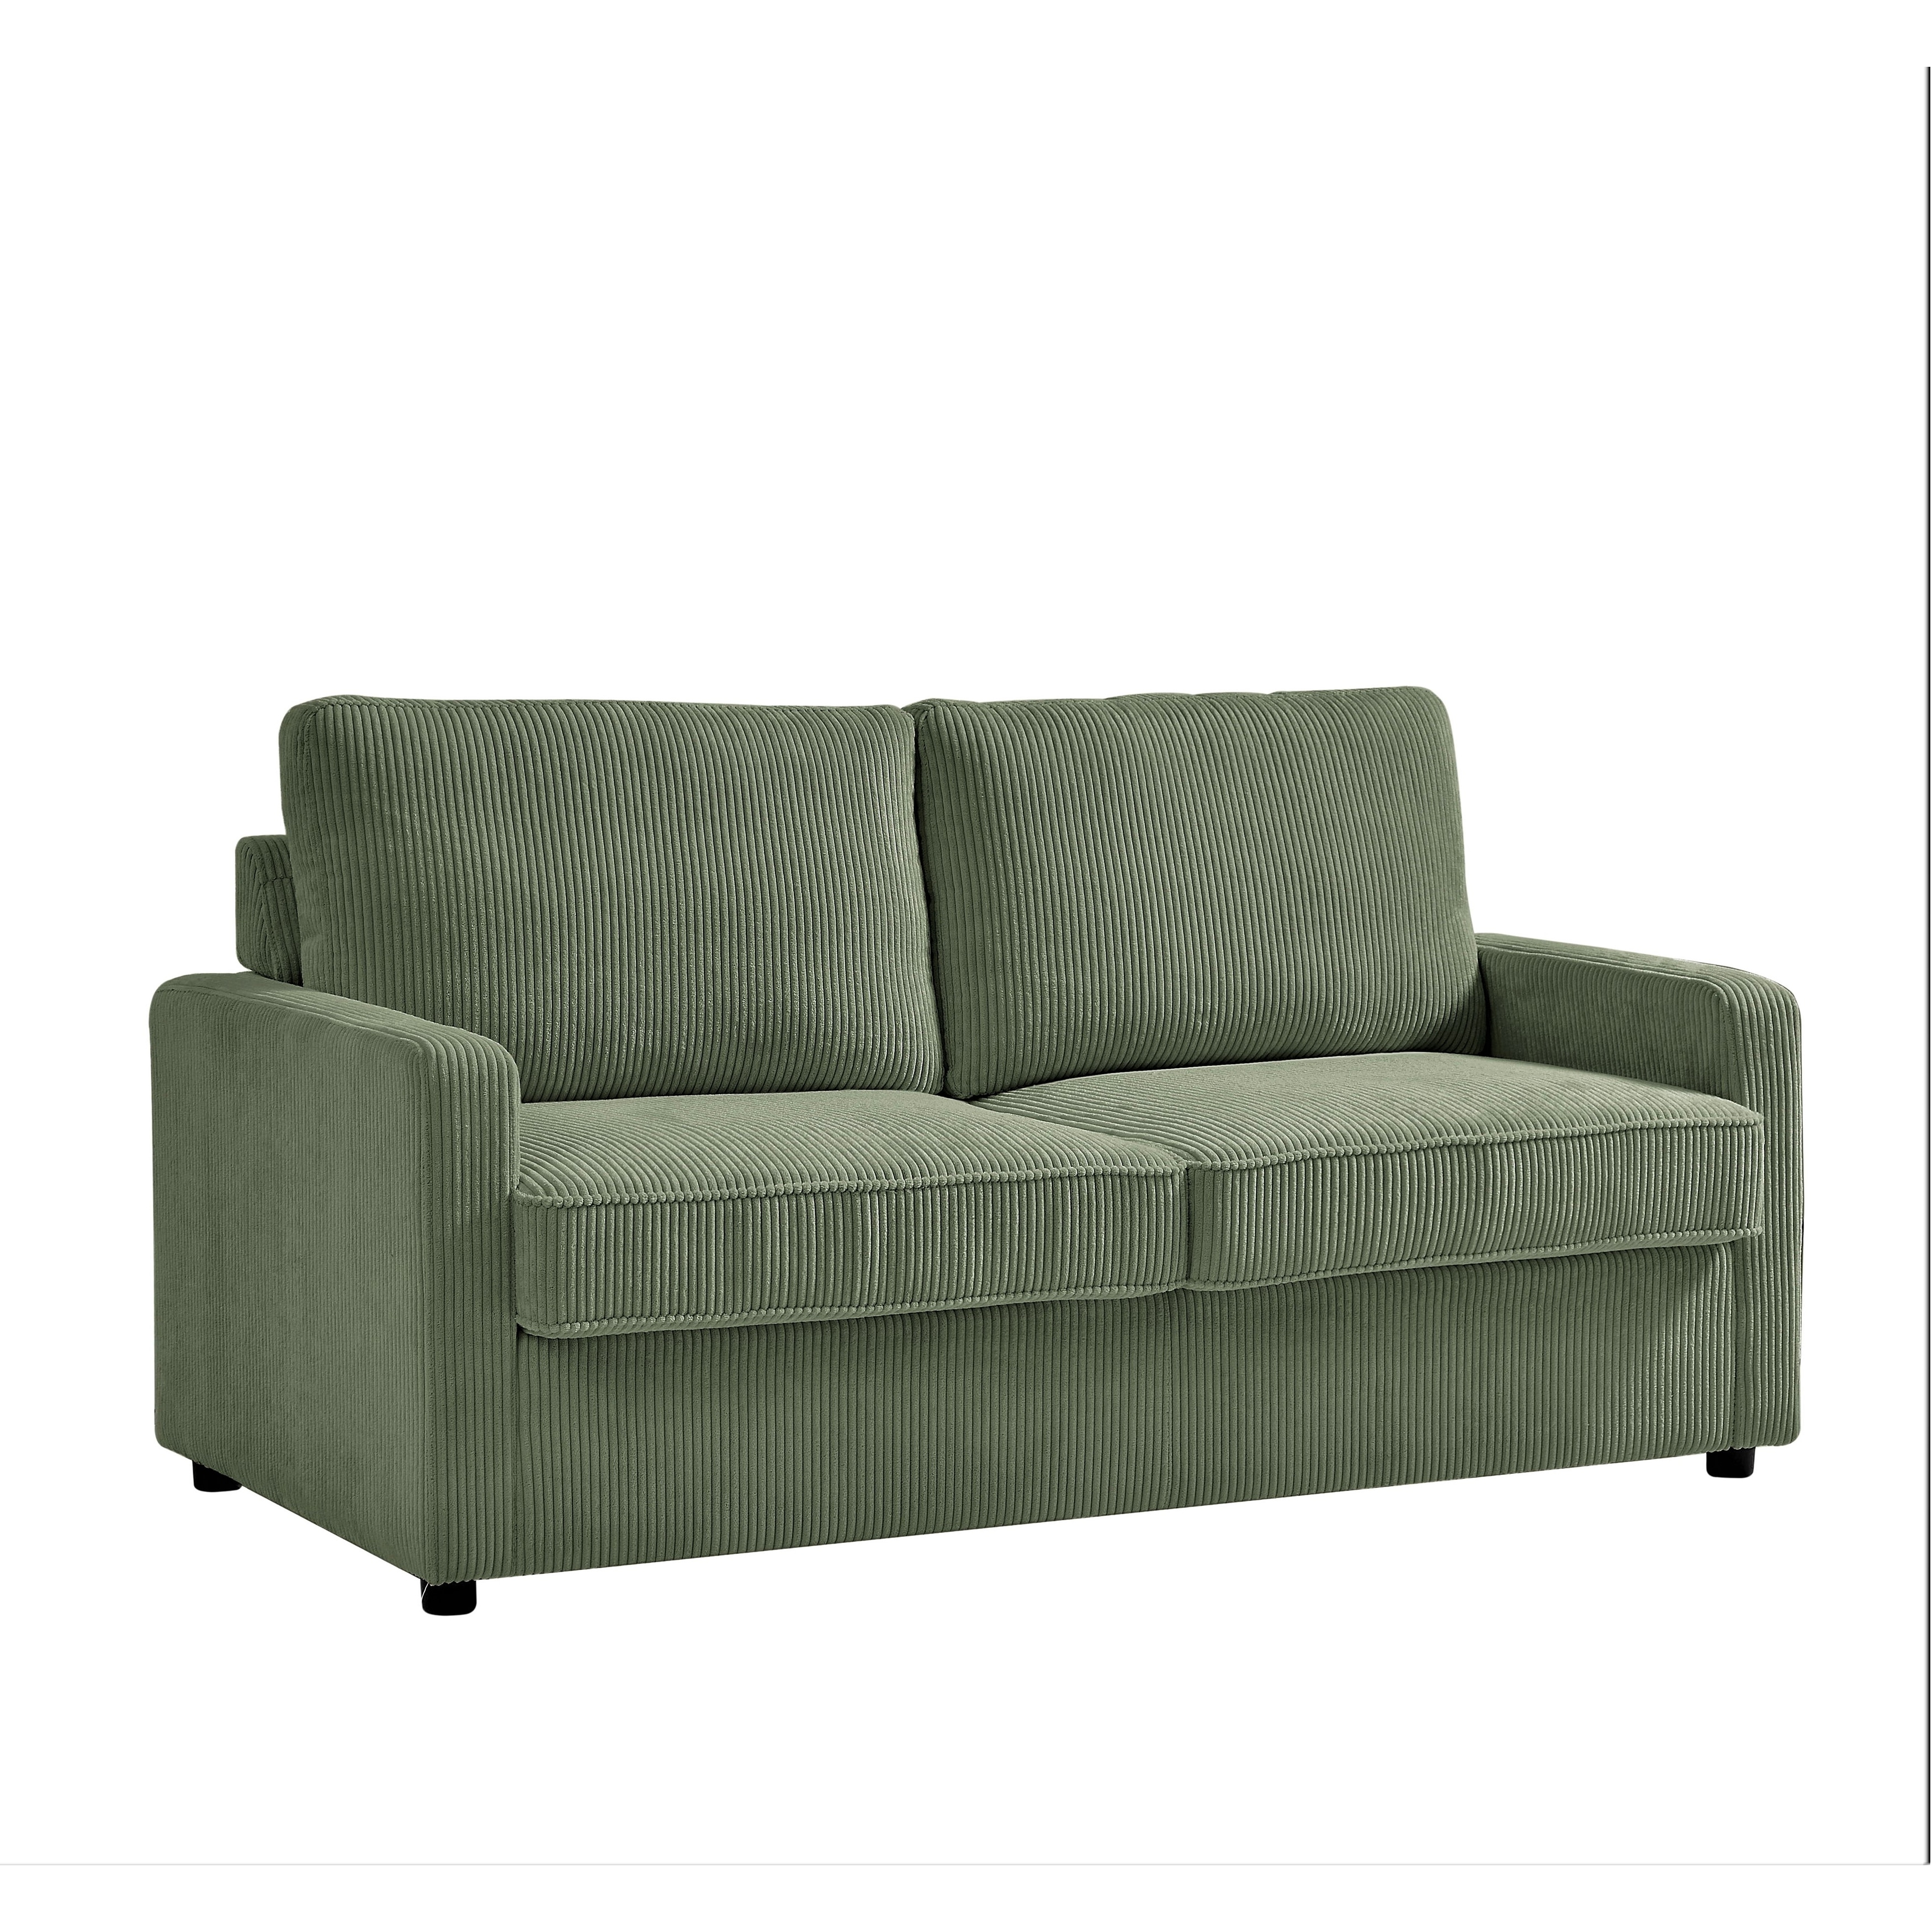 Manchester Polyester Corduroy 70" Square Arms Sofa Bed